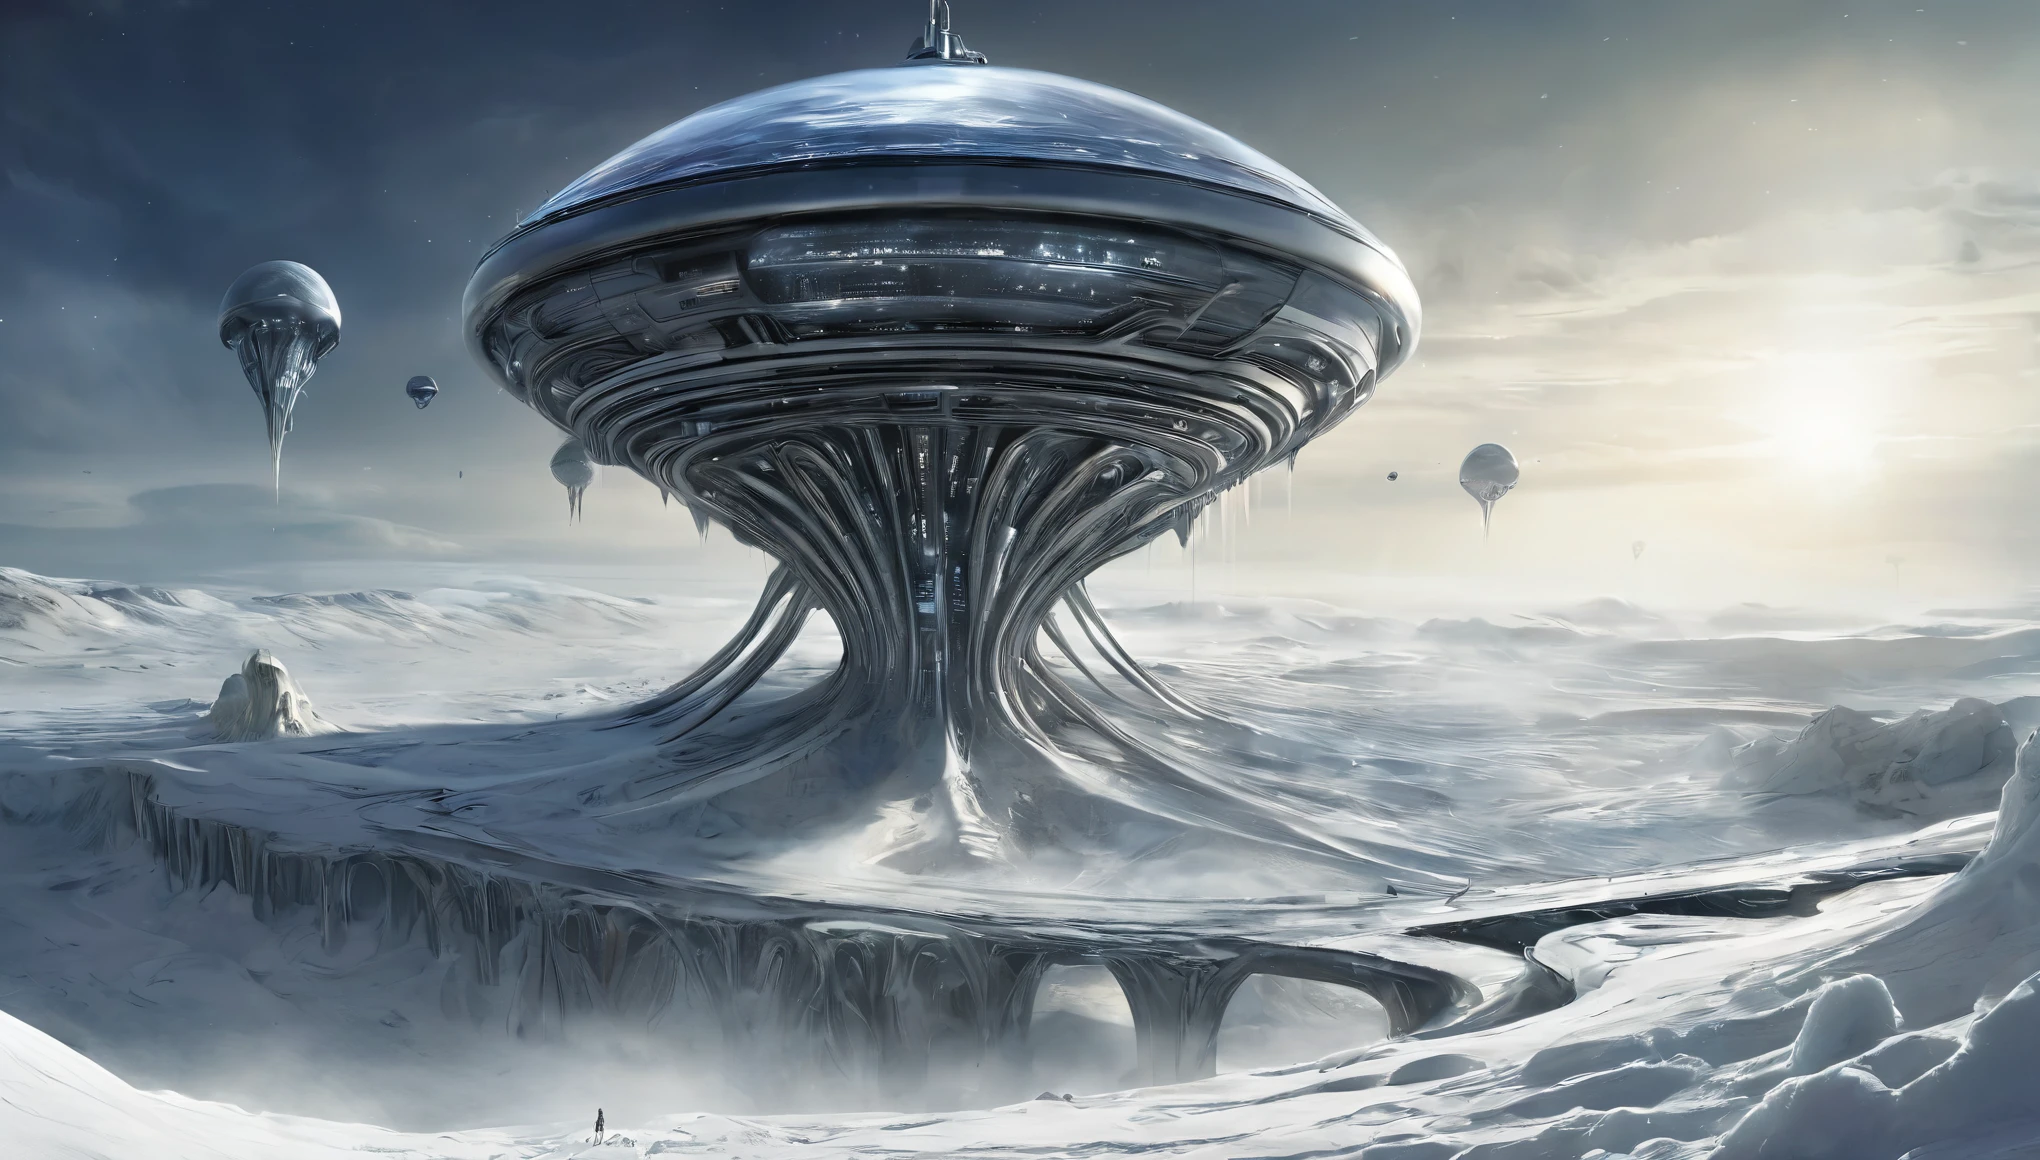 ICE PLANET, h.r. Giger concept art for Alien, various illustrations about white planet, frozen, far from the stars, Snow storms, spaceship flies between the wind and heavy snowfall, hyper realistic image high resolution HDr, UHDr, 16k, professional cinema lighting, ((CUBIErTO DE NIEVE)), ((PLANETA CON SUPErFICIE  INTrINCADA, COLONIA EN MEDIOS DE rOCAS DE HIELO ESCArPADAS)), (PHOTOGrAPHY SHOOTING WITH WIDE ANGLE LENS, isometric perspective), ((NAVE ESPACIAL PASA SOBrE COLONIA EN ICE PLANET GrAN PLANO GENErAL))
